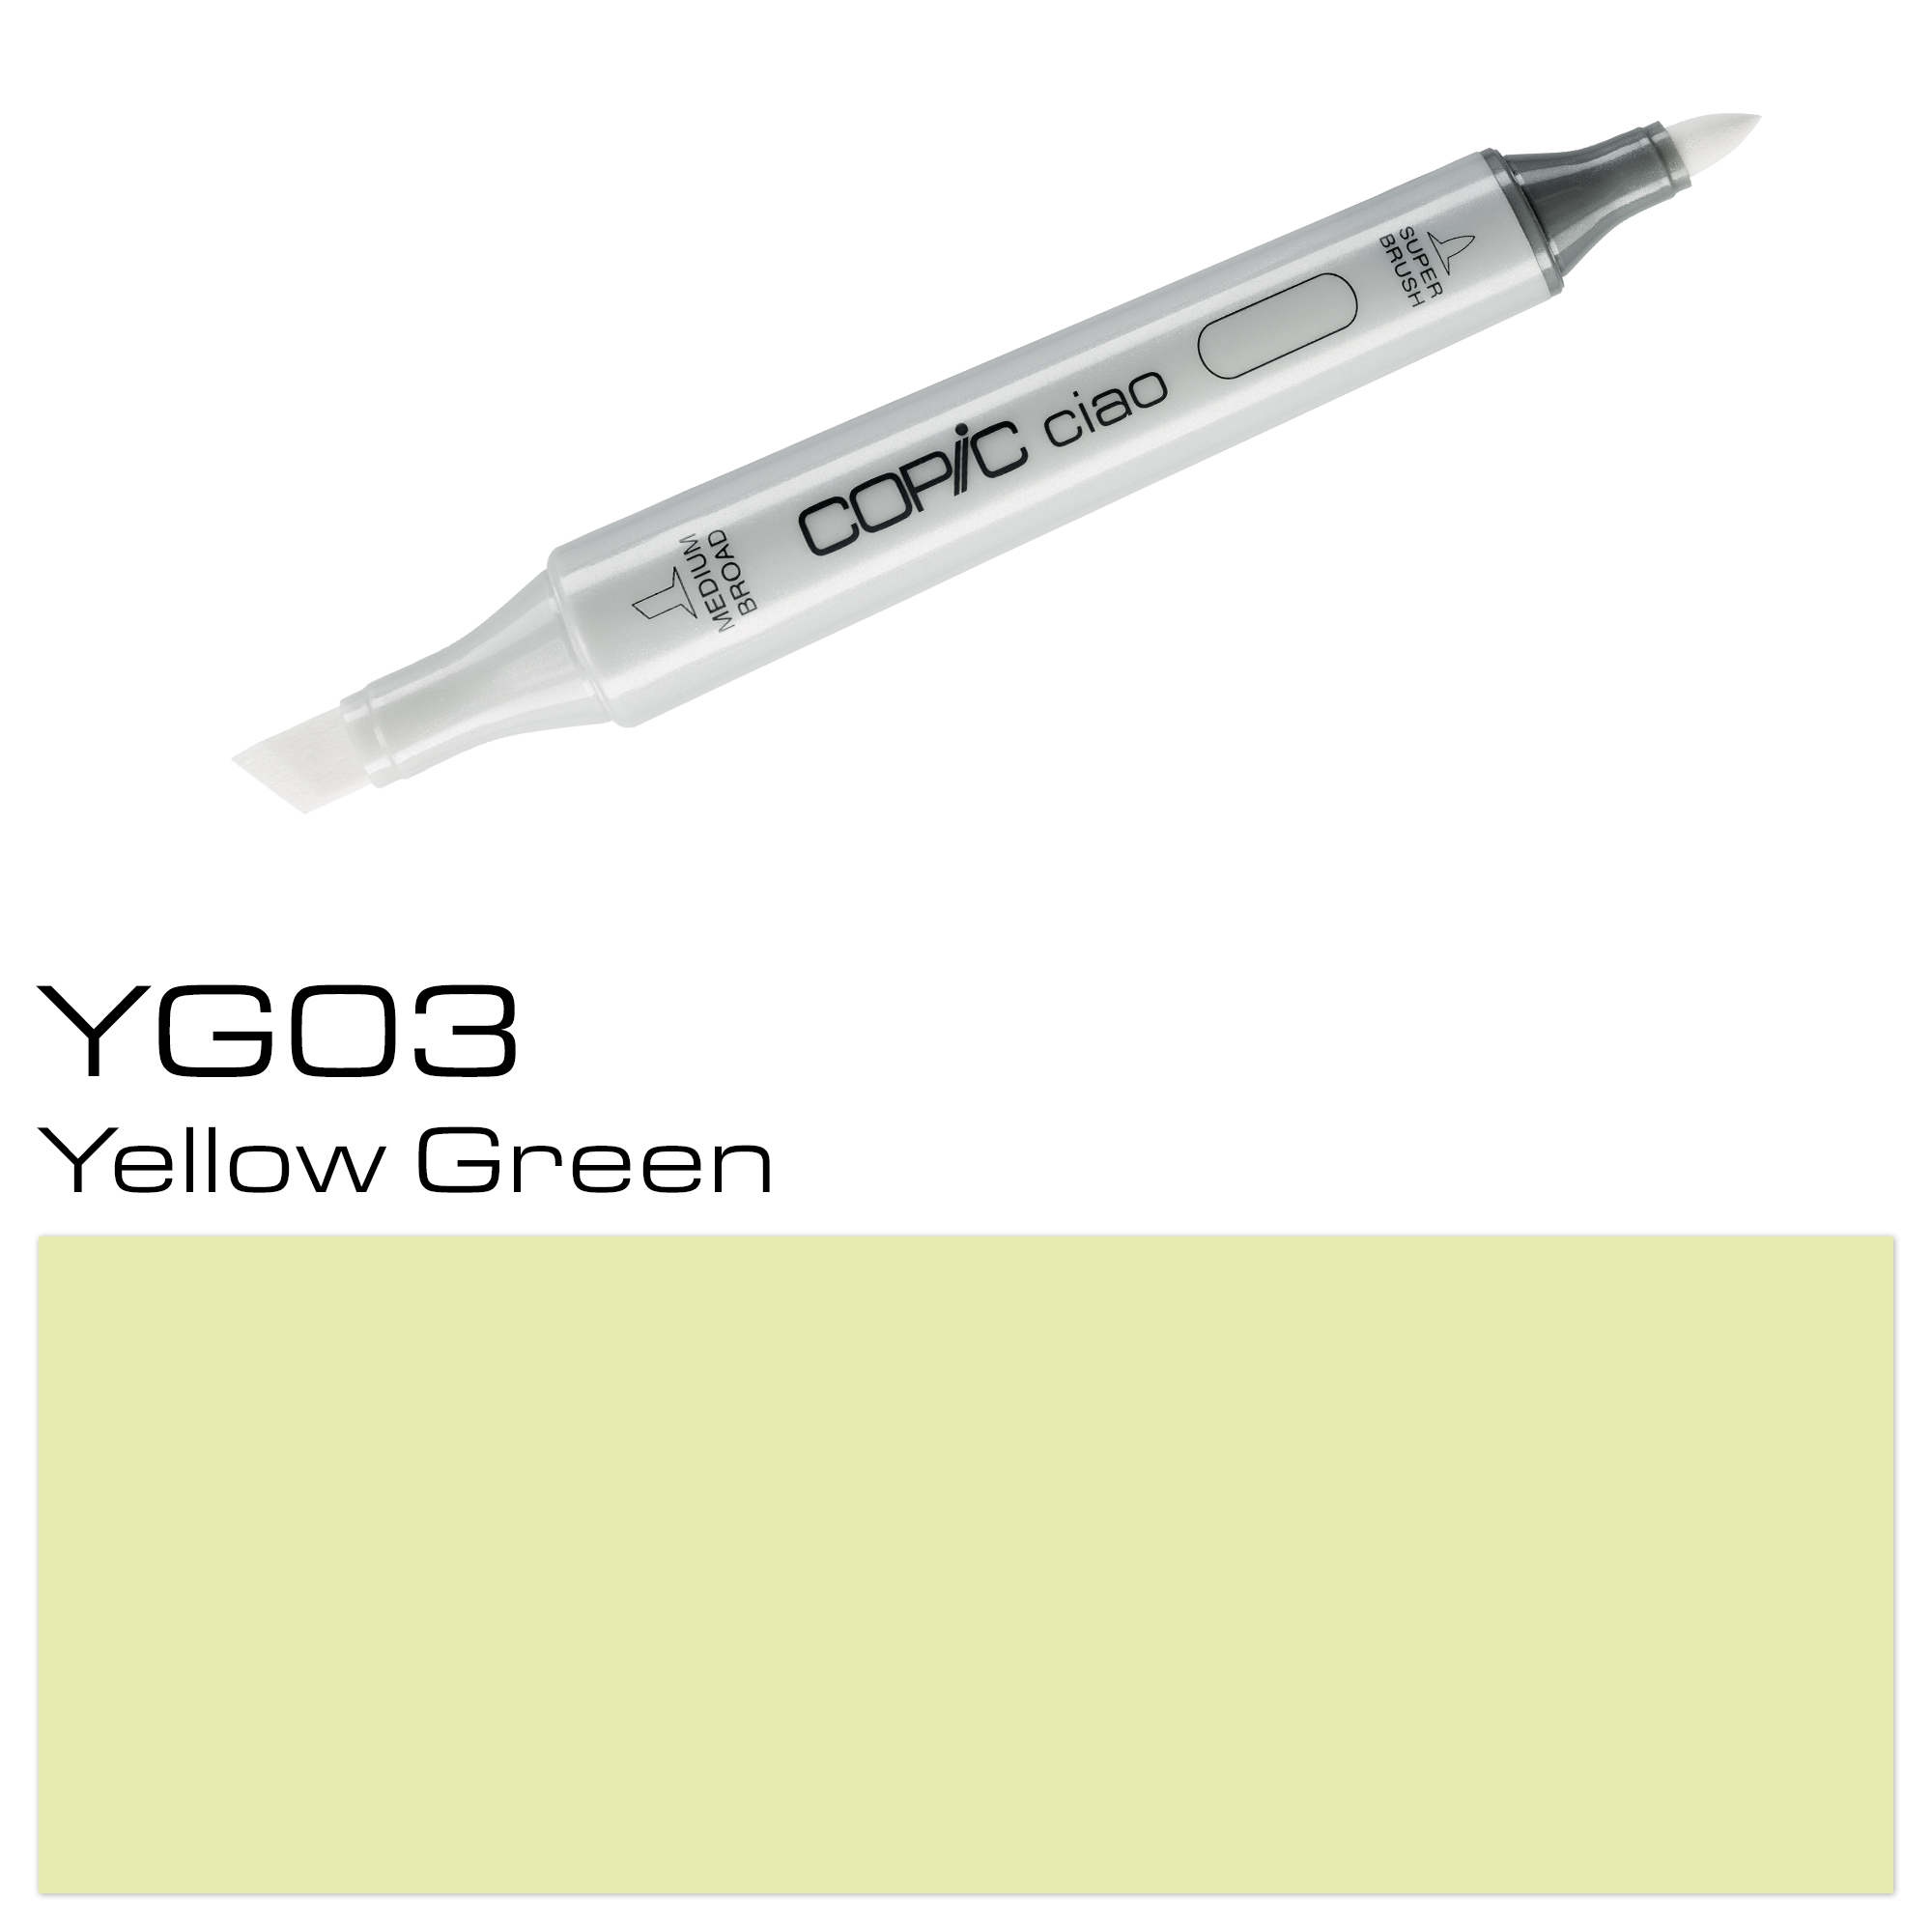 COPIC CIAO YELLOW GREEN YG03